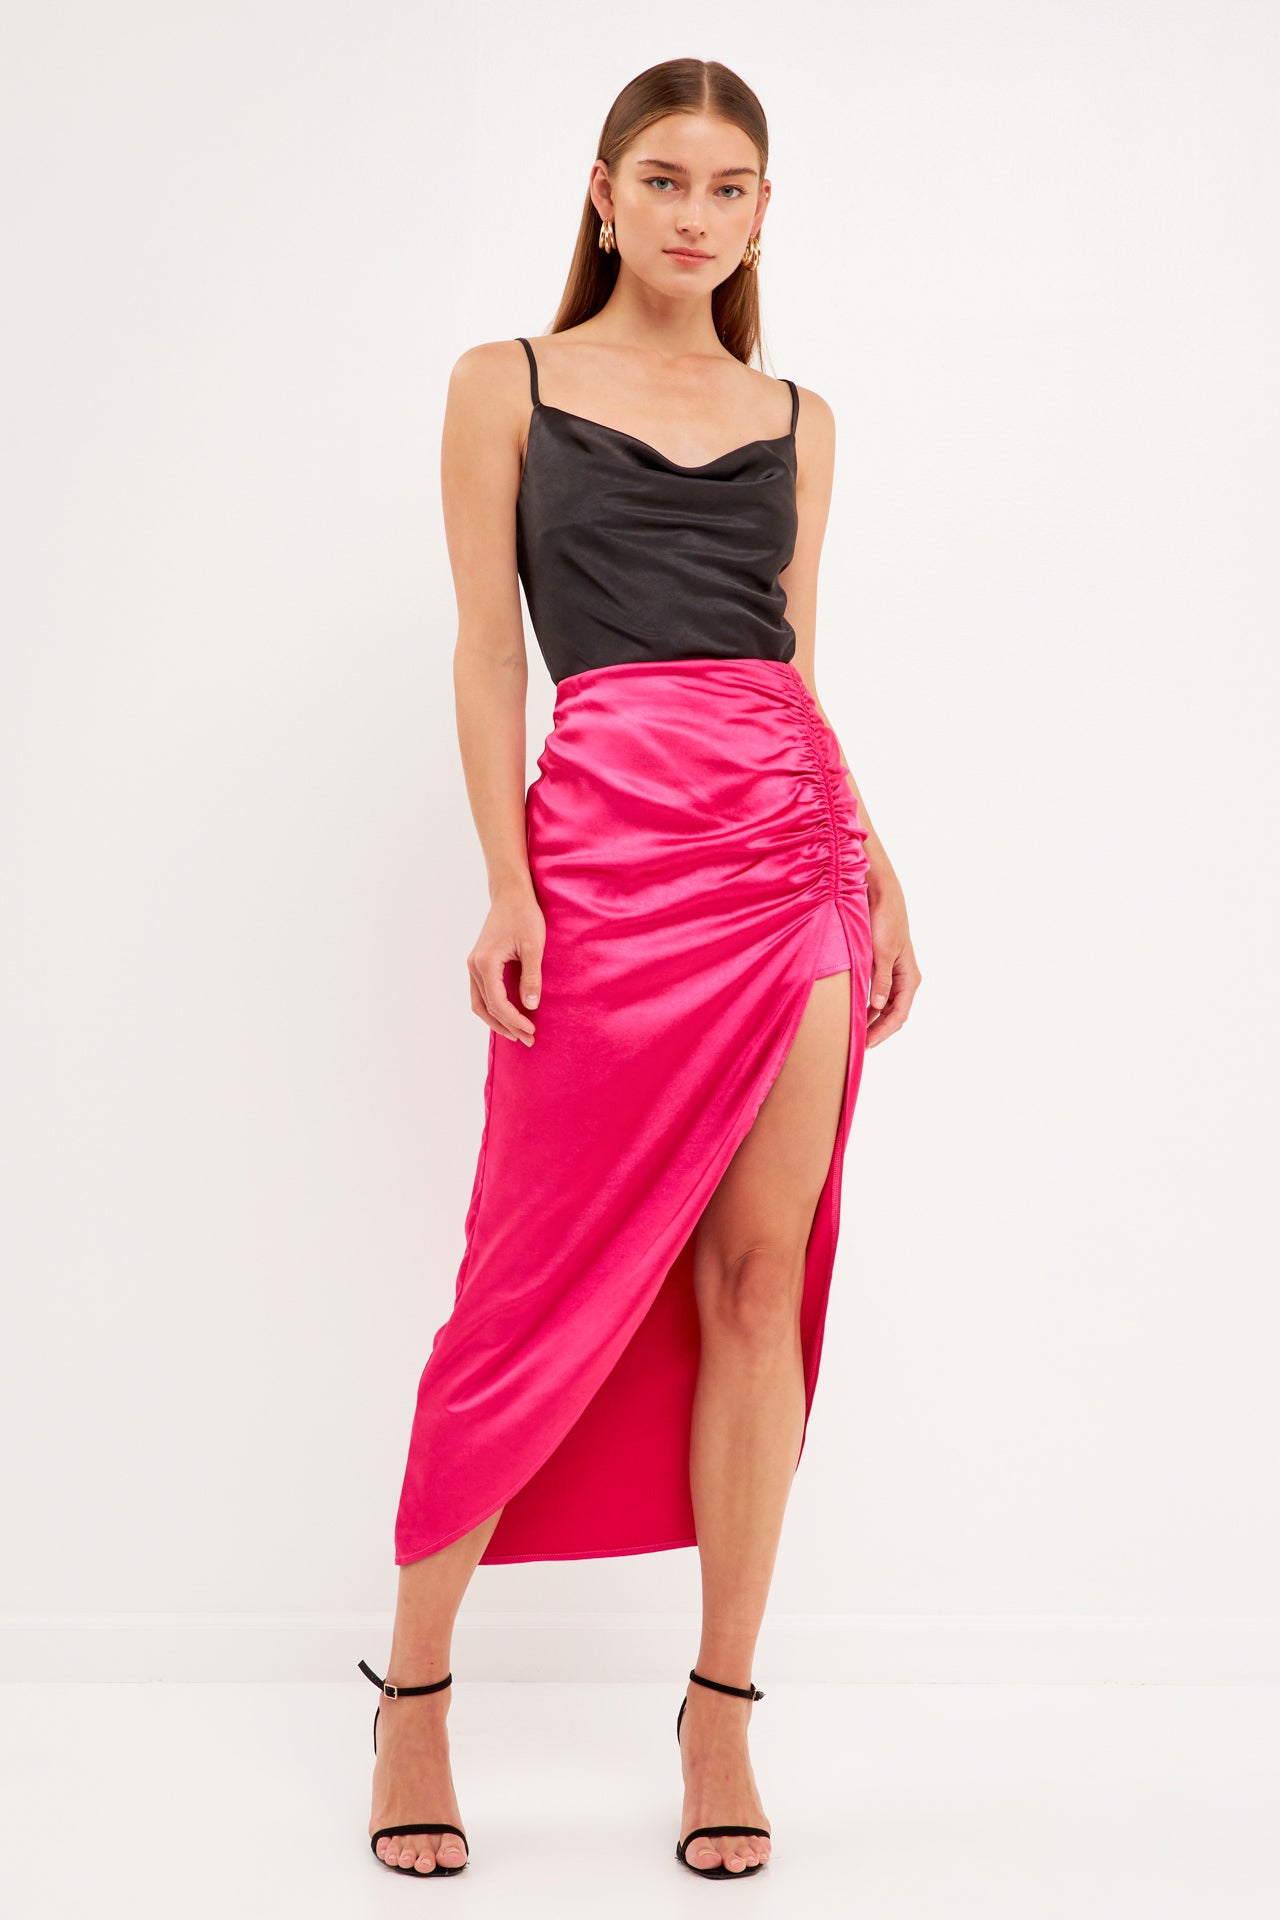 Endless Rose - Front Slit Midi Skirt - Skirts in Women's Clothing available at endlessrose.com